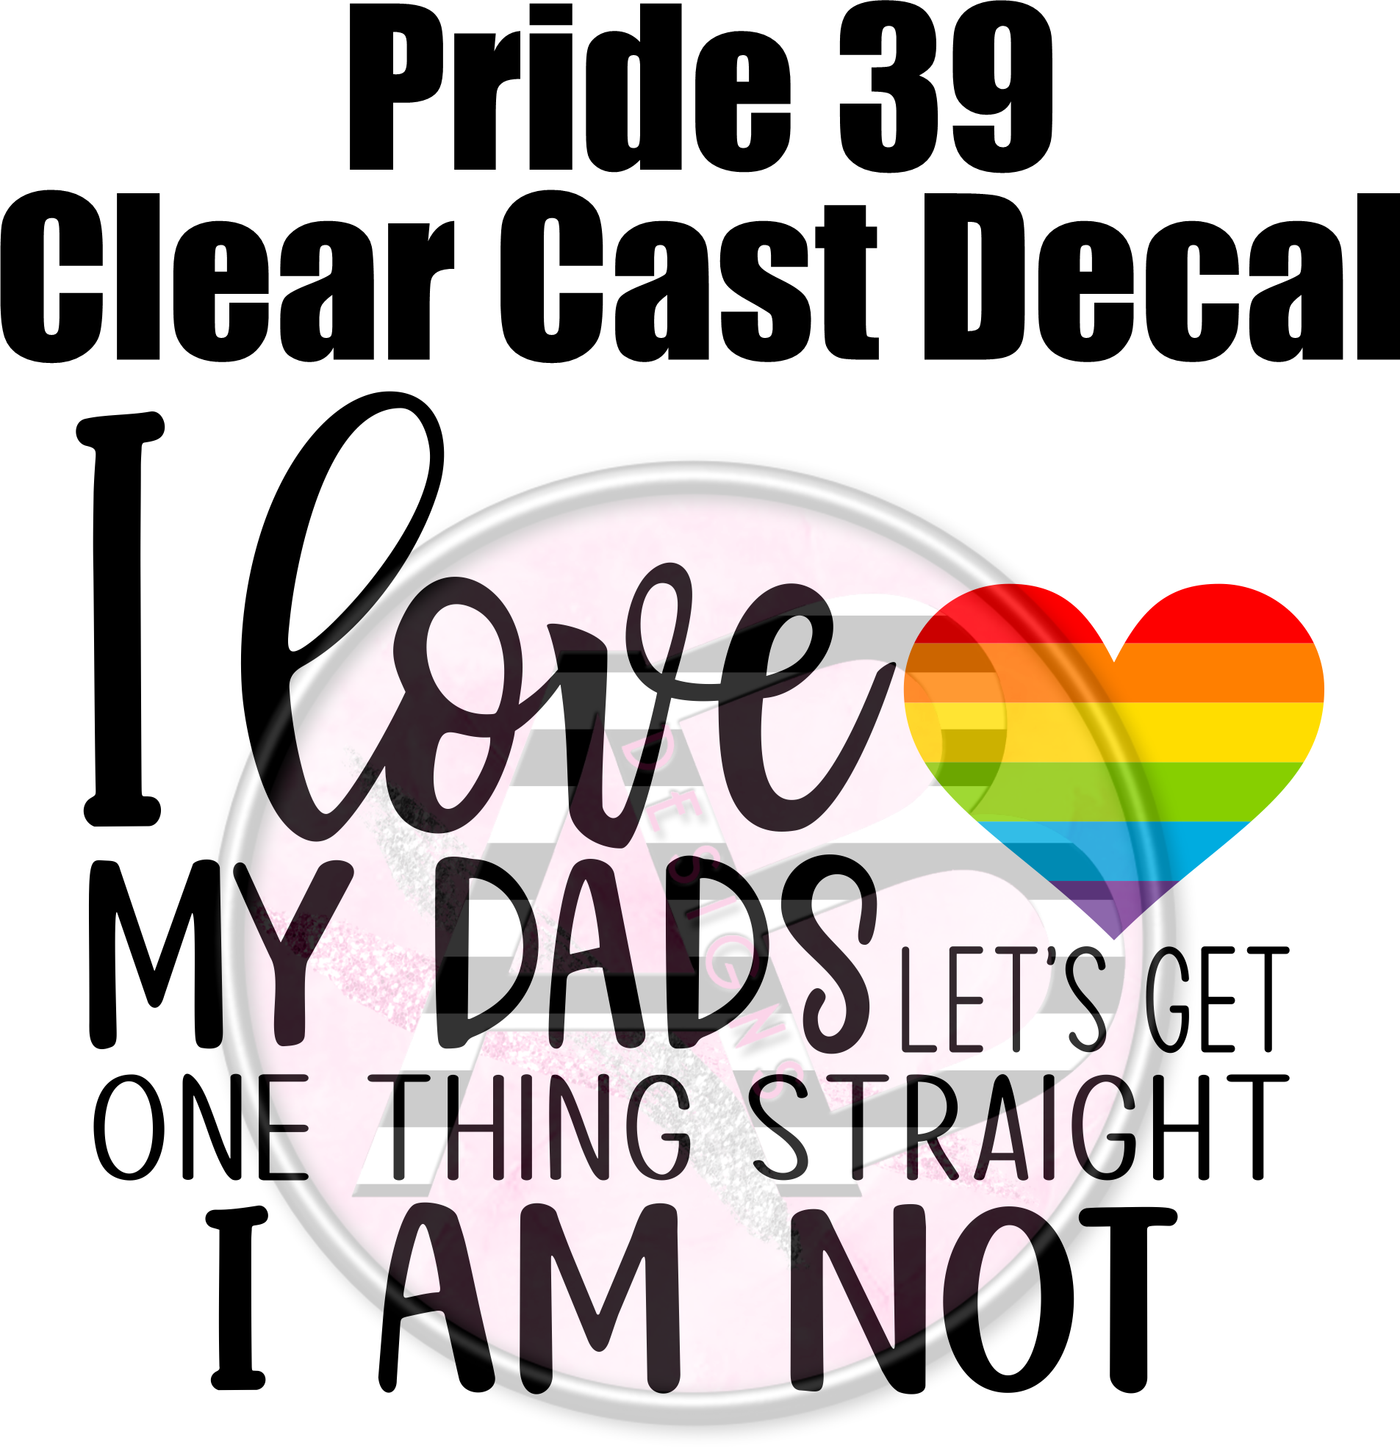 Pride 39 - Clear Cast Decal